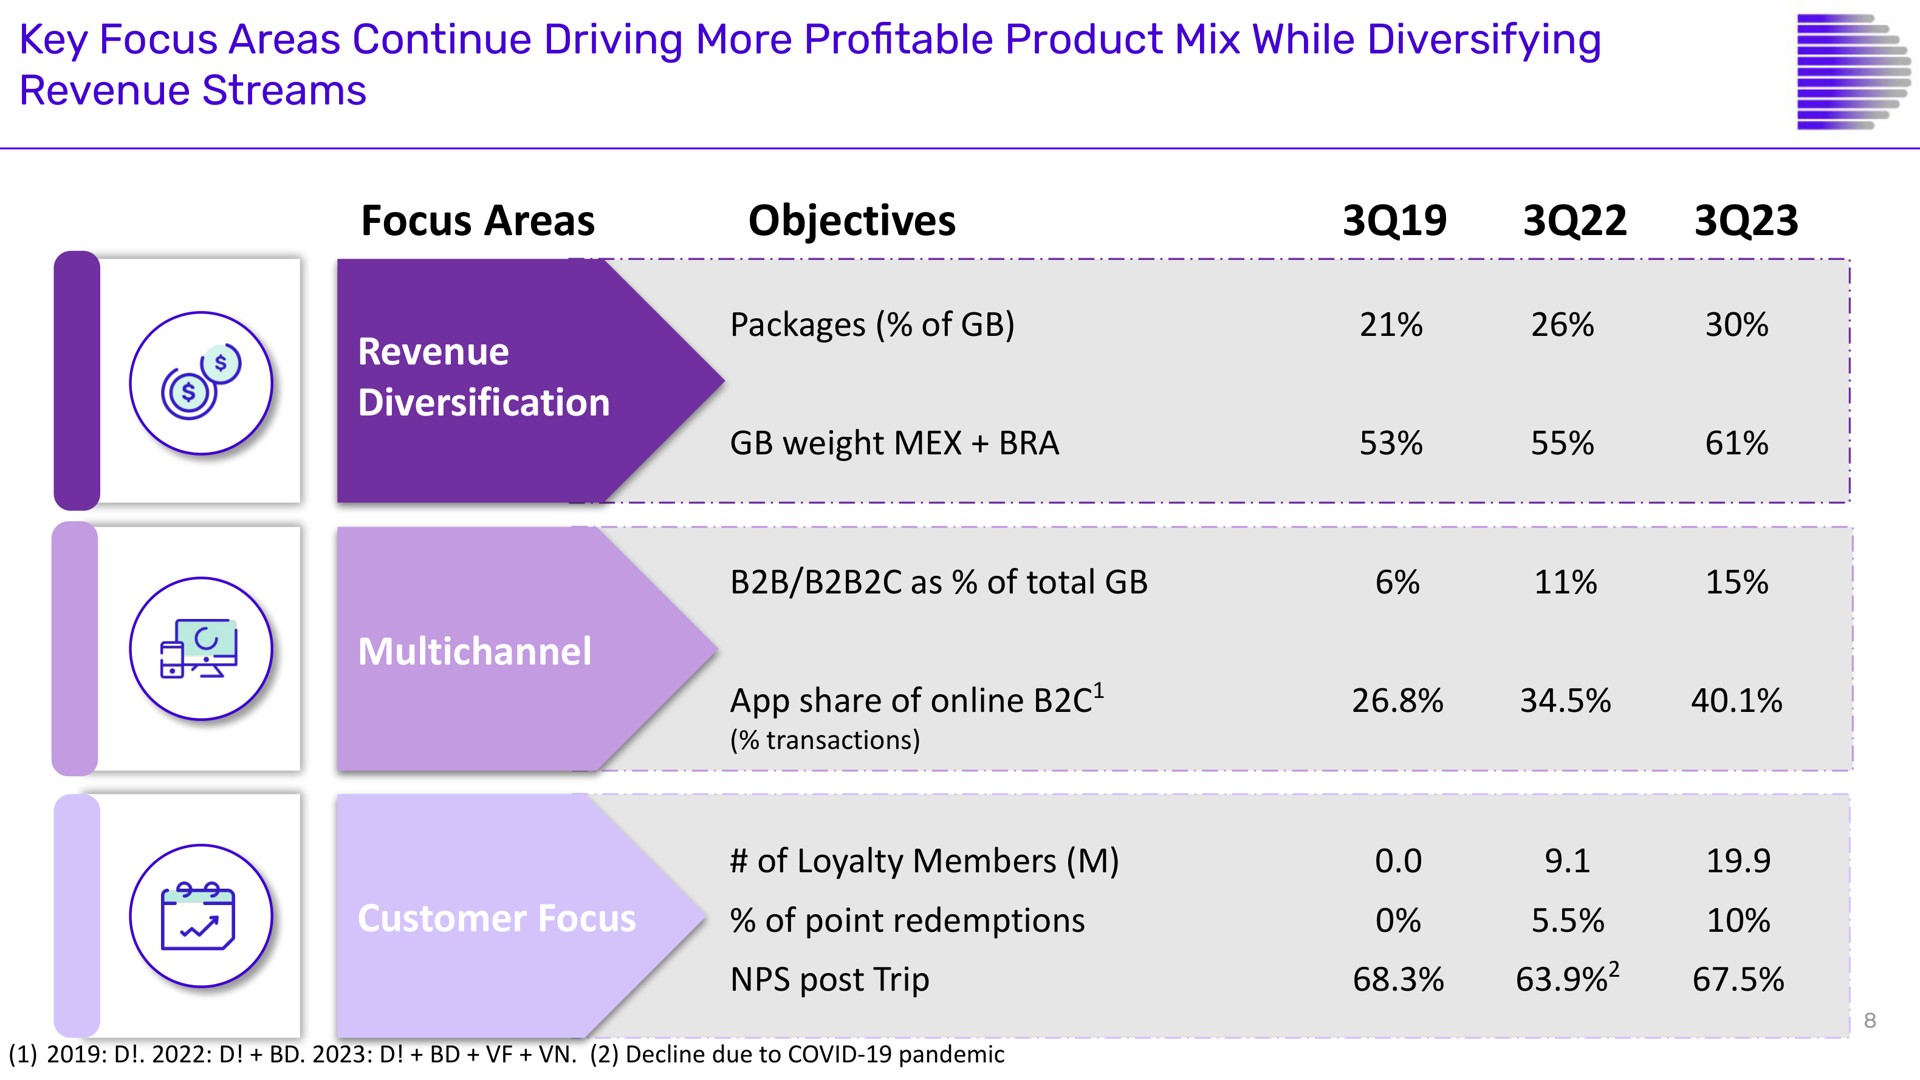 key focus areas continue driving more pro table product mix while diversifying revenue streams focus areas objectives revenue diversification customer focus profitable | Despegar